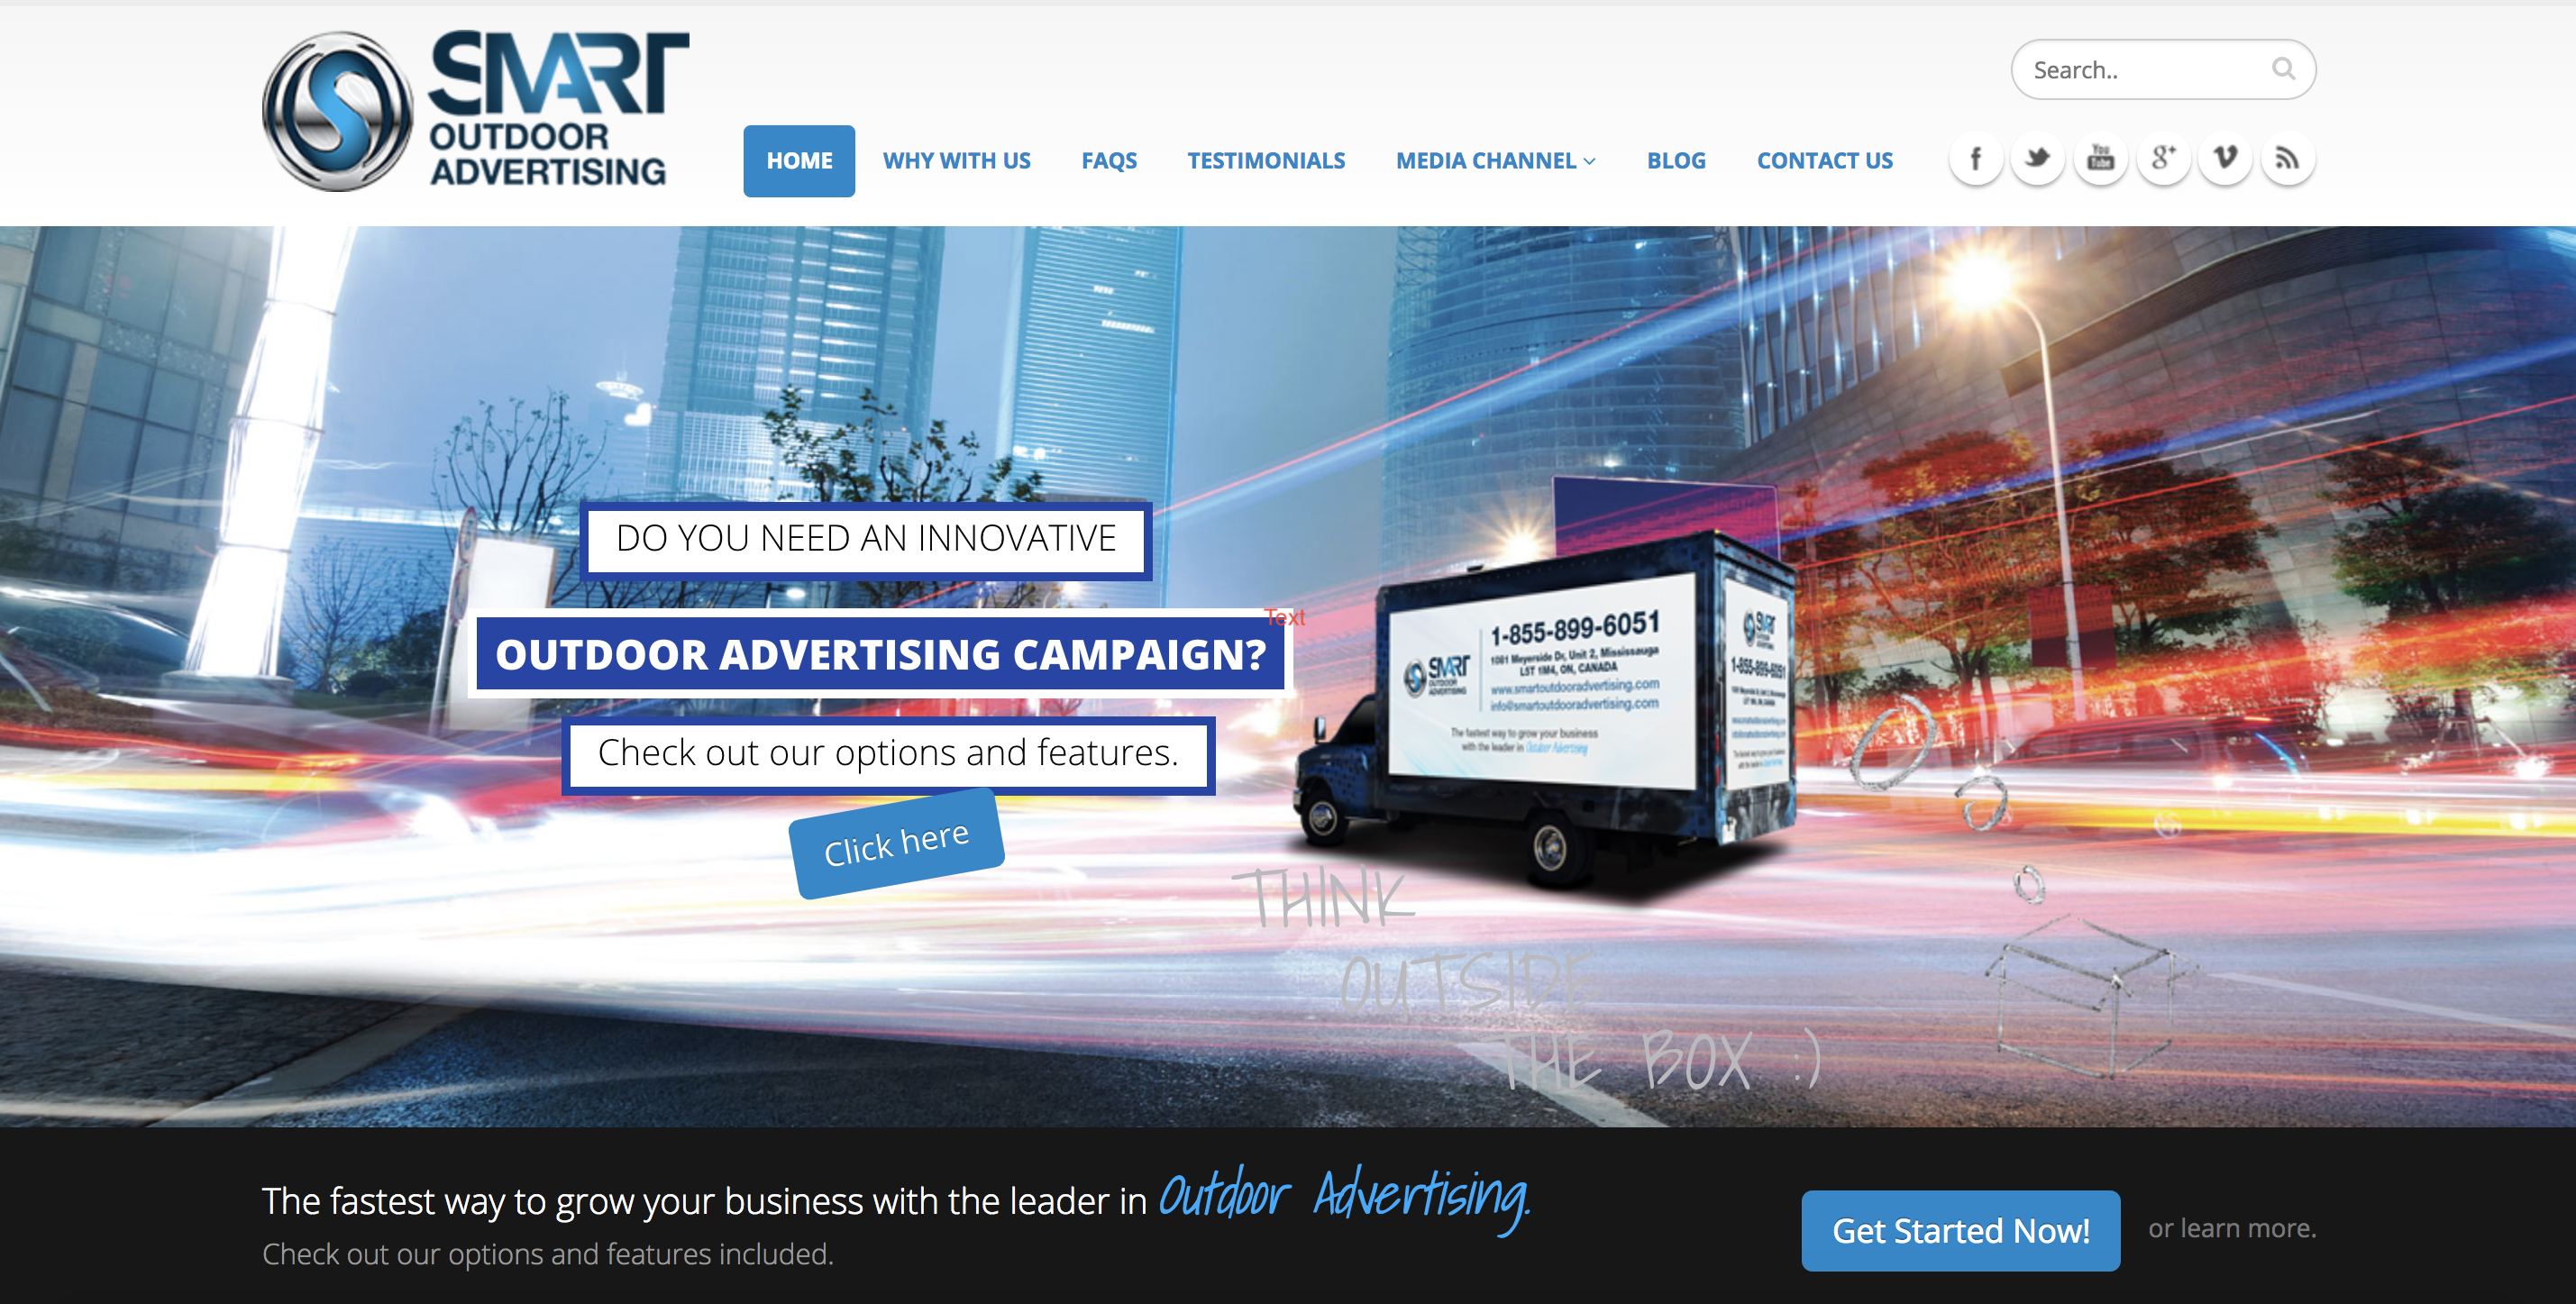 smart outdoor advertising website-1 mobile billboards advertising ooh out-of-home outdoor media marketing moving billboards truck advertising